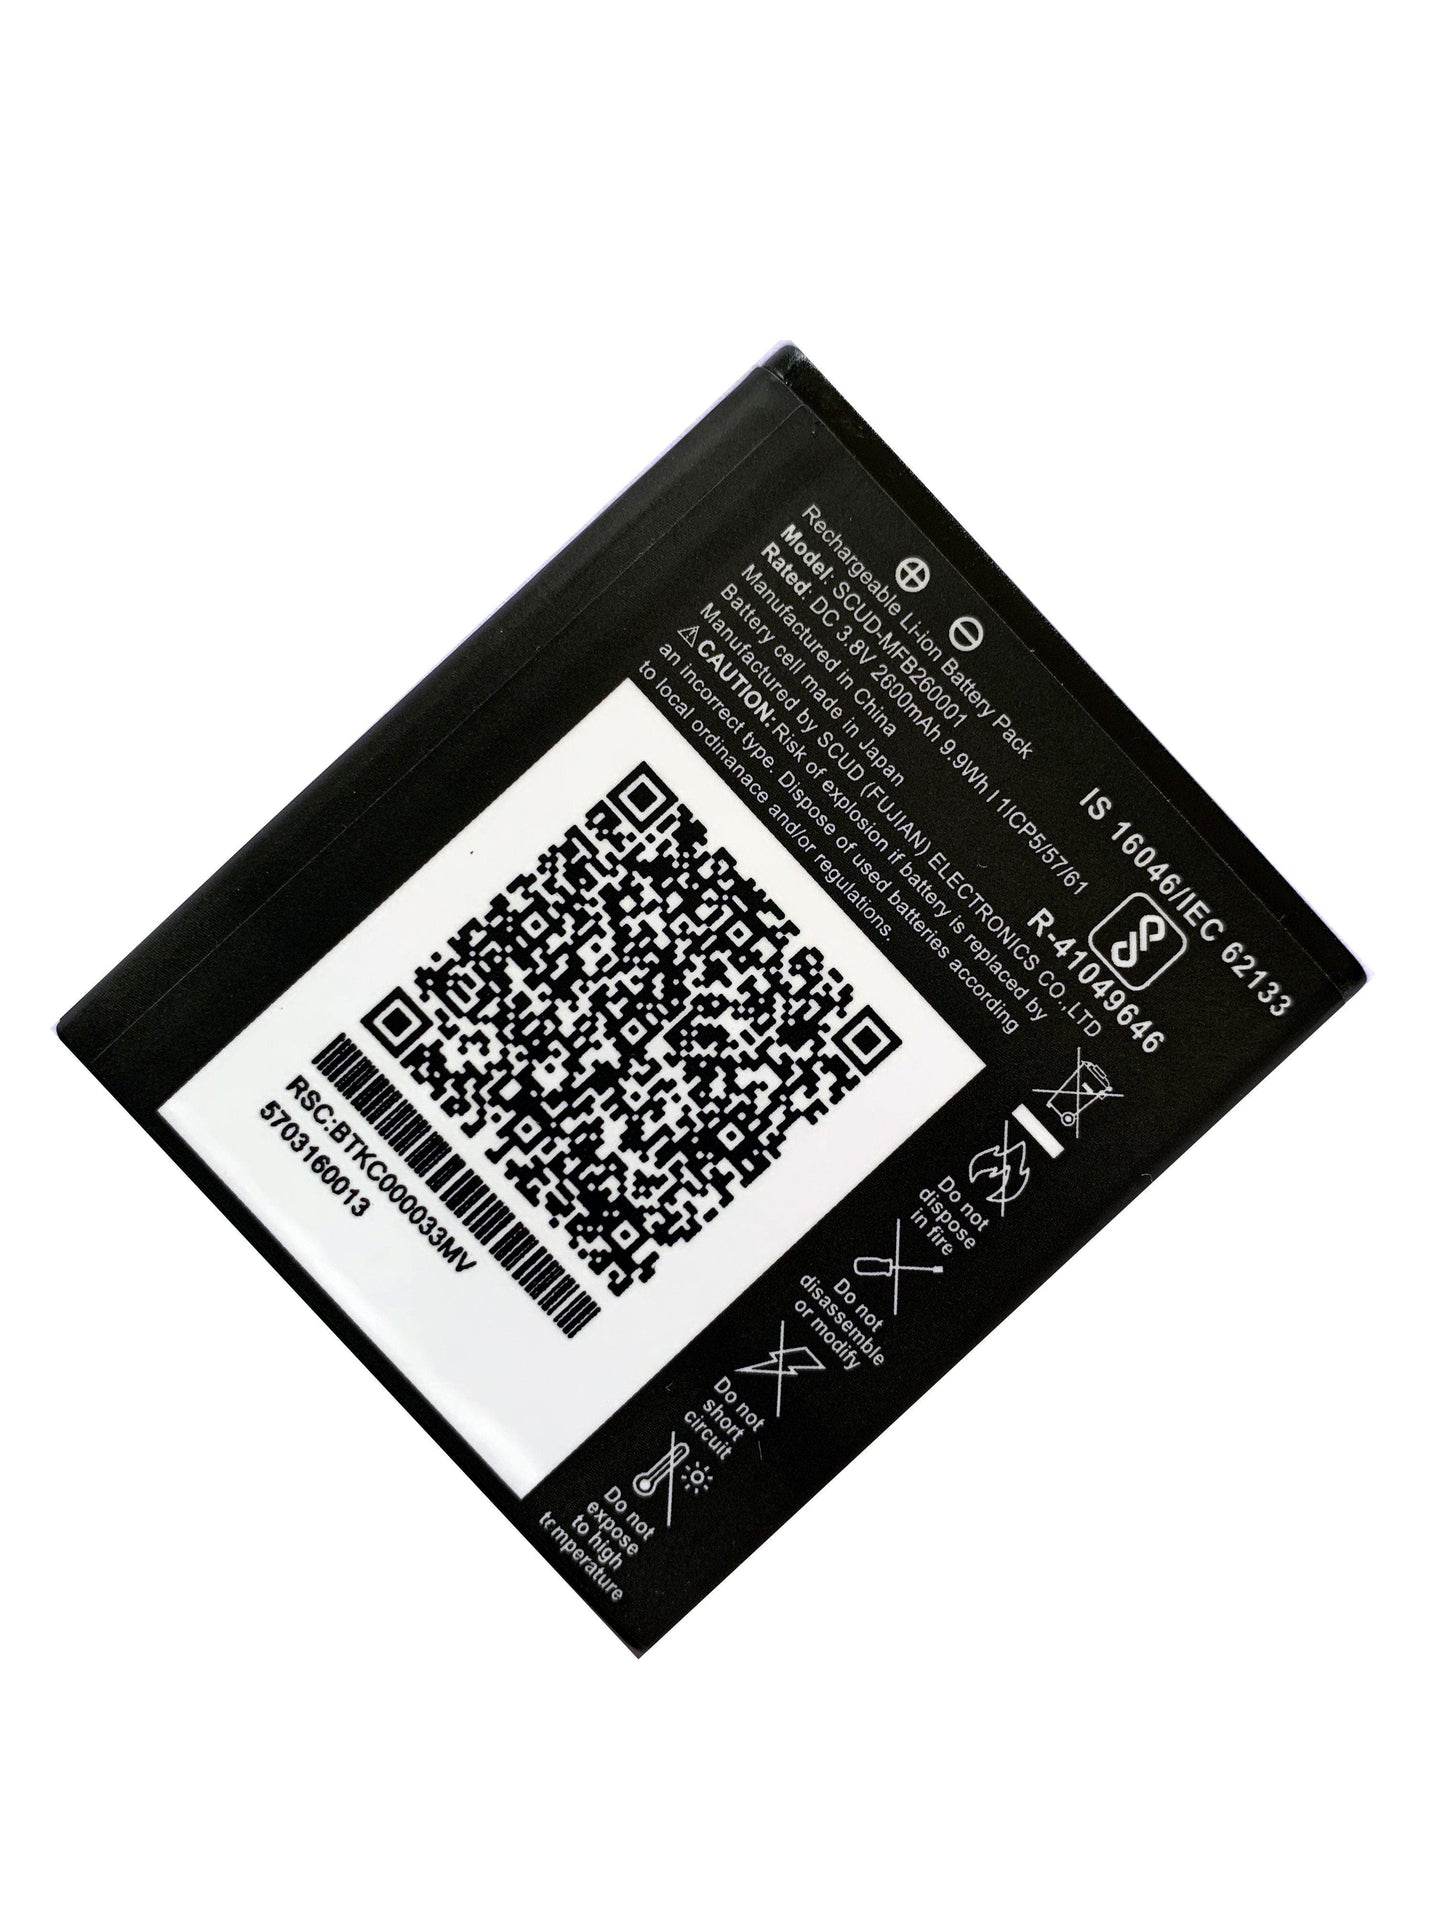 Battery for Reliance Jio Wi-Fi JMR541 Wireless Data Card SCUD-MFB260001 - Indclues